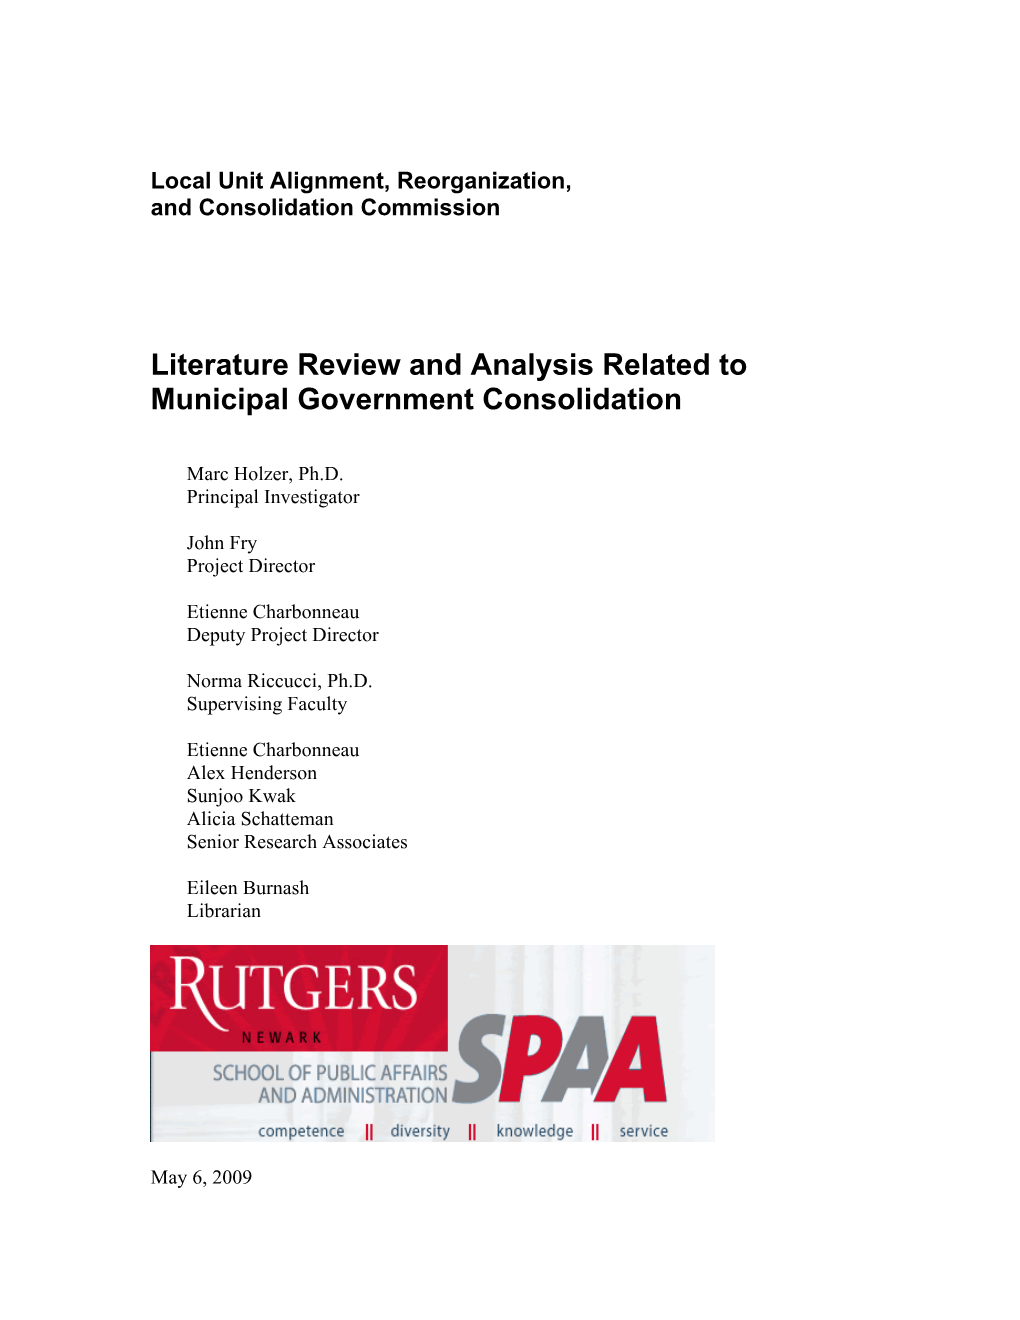 Literature Review and Analysis Related to Municipal Government Consolidation